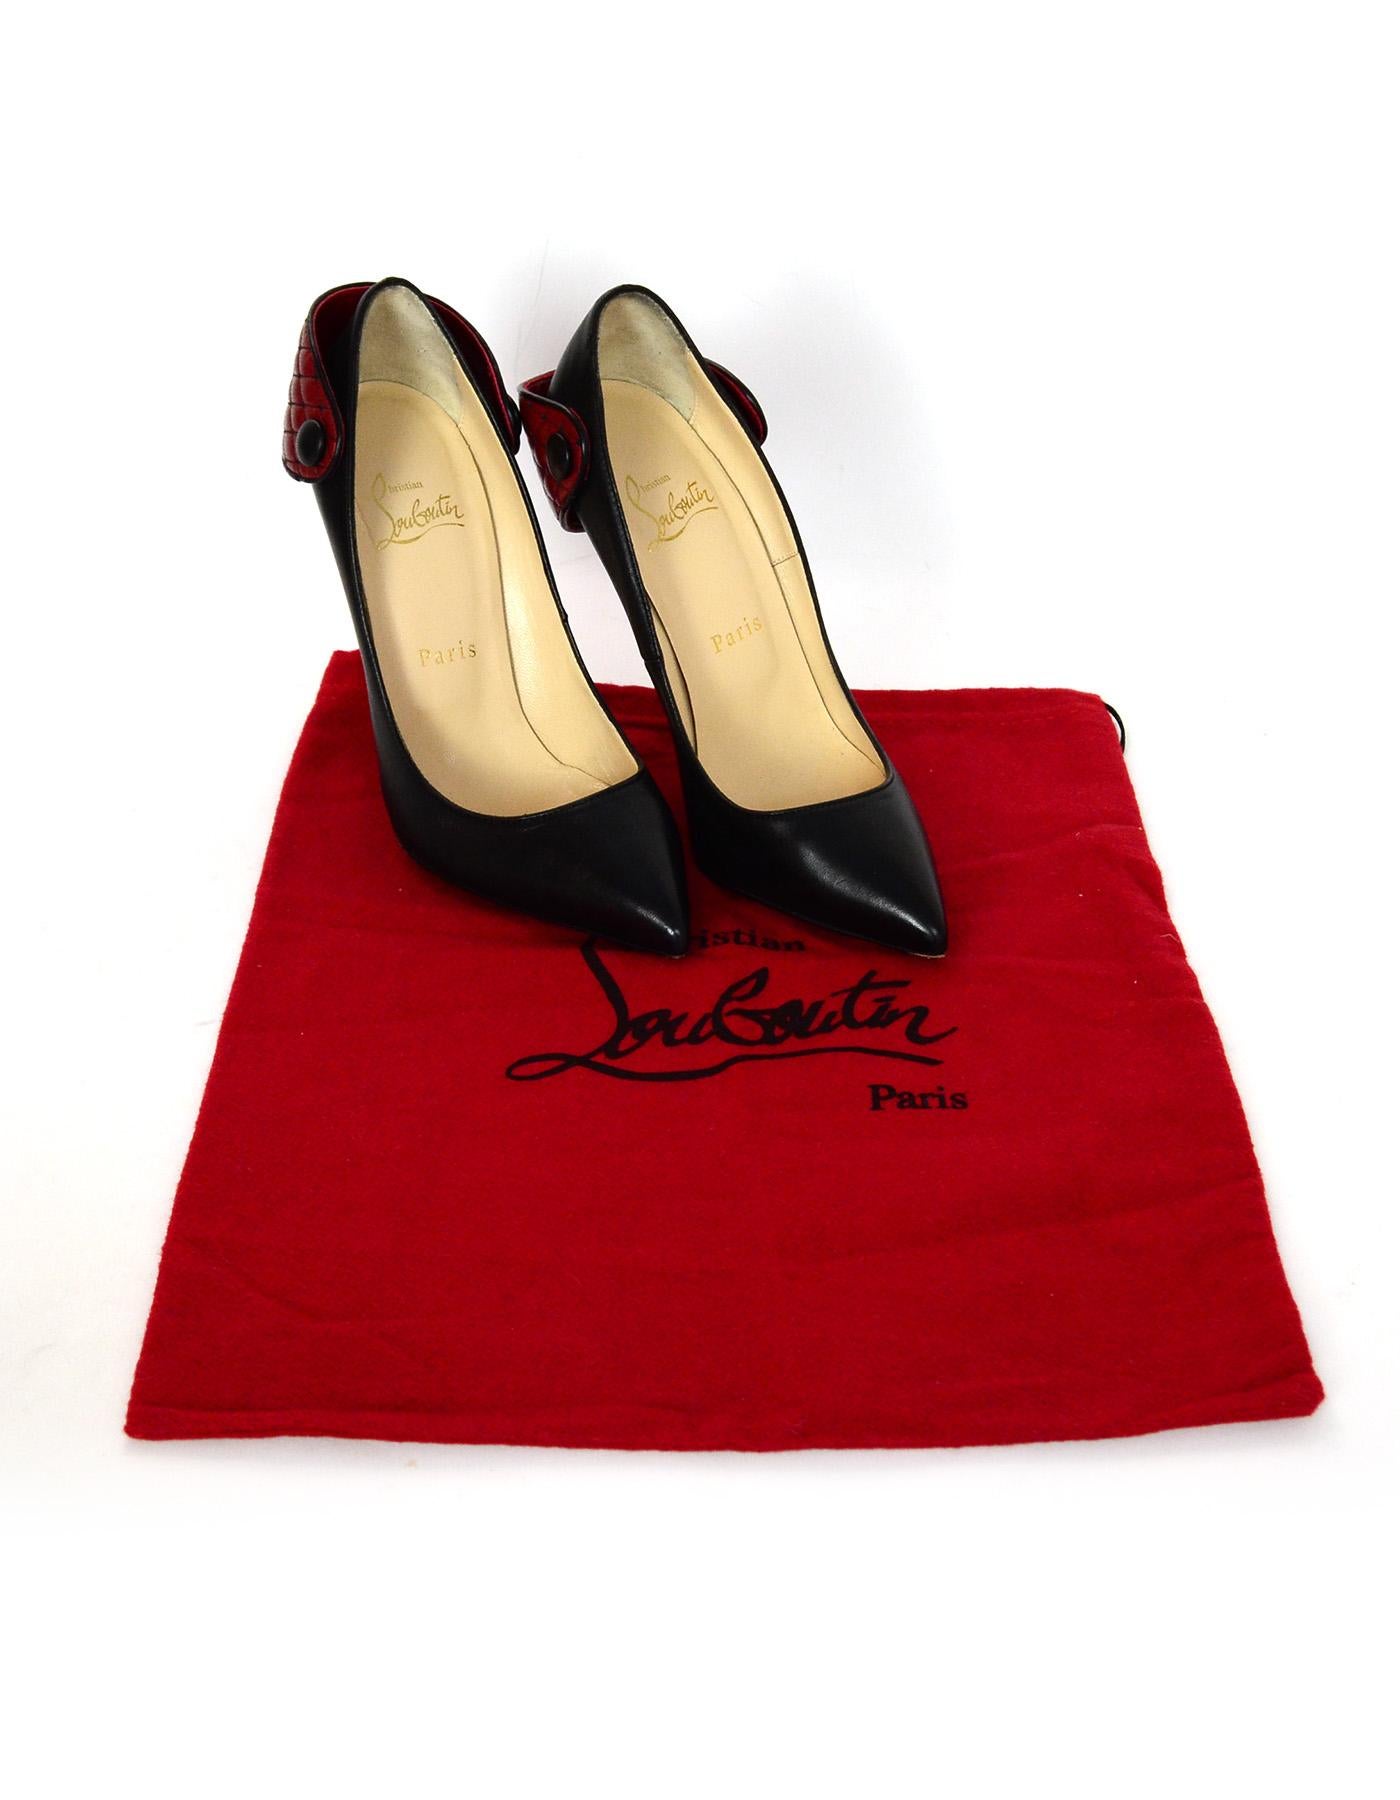 Christian Louboutin Leather Huguetta 120 Pumps W/ Red Quilted Cuff & Brass Metallic Heel Sz 37

Made In: Italy
Color: Black, red, brass
Materials: Leather
Closure/Opening: Slide on
Overall Condition: Excellent pre-owned condition with the exception